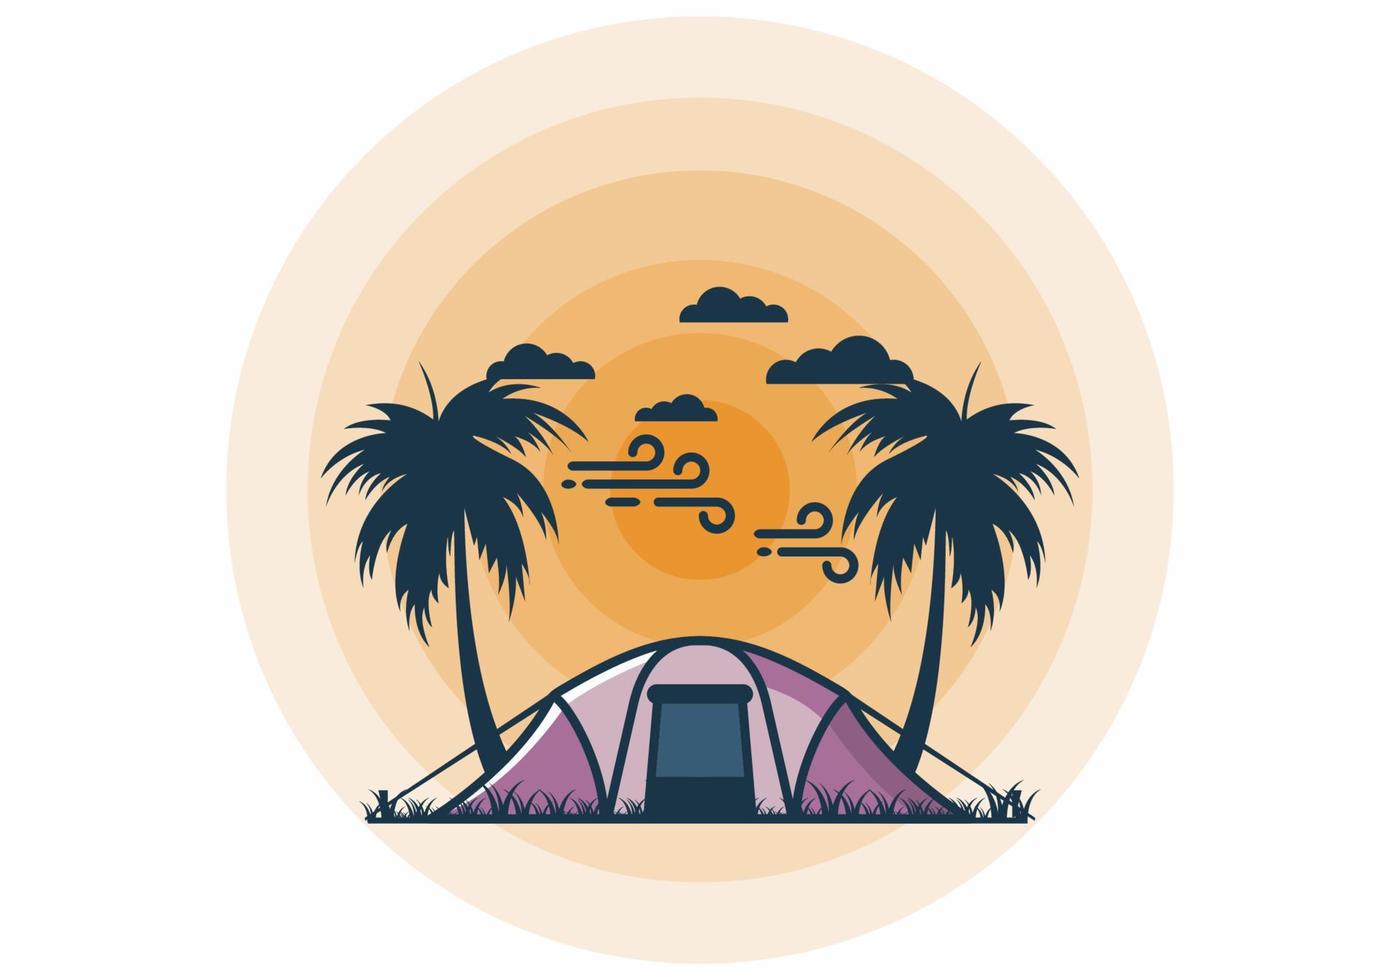 Stay in tent under coconut trees flat illustration vector